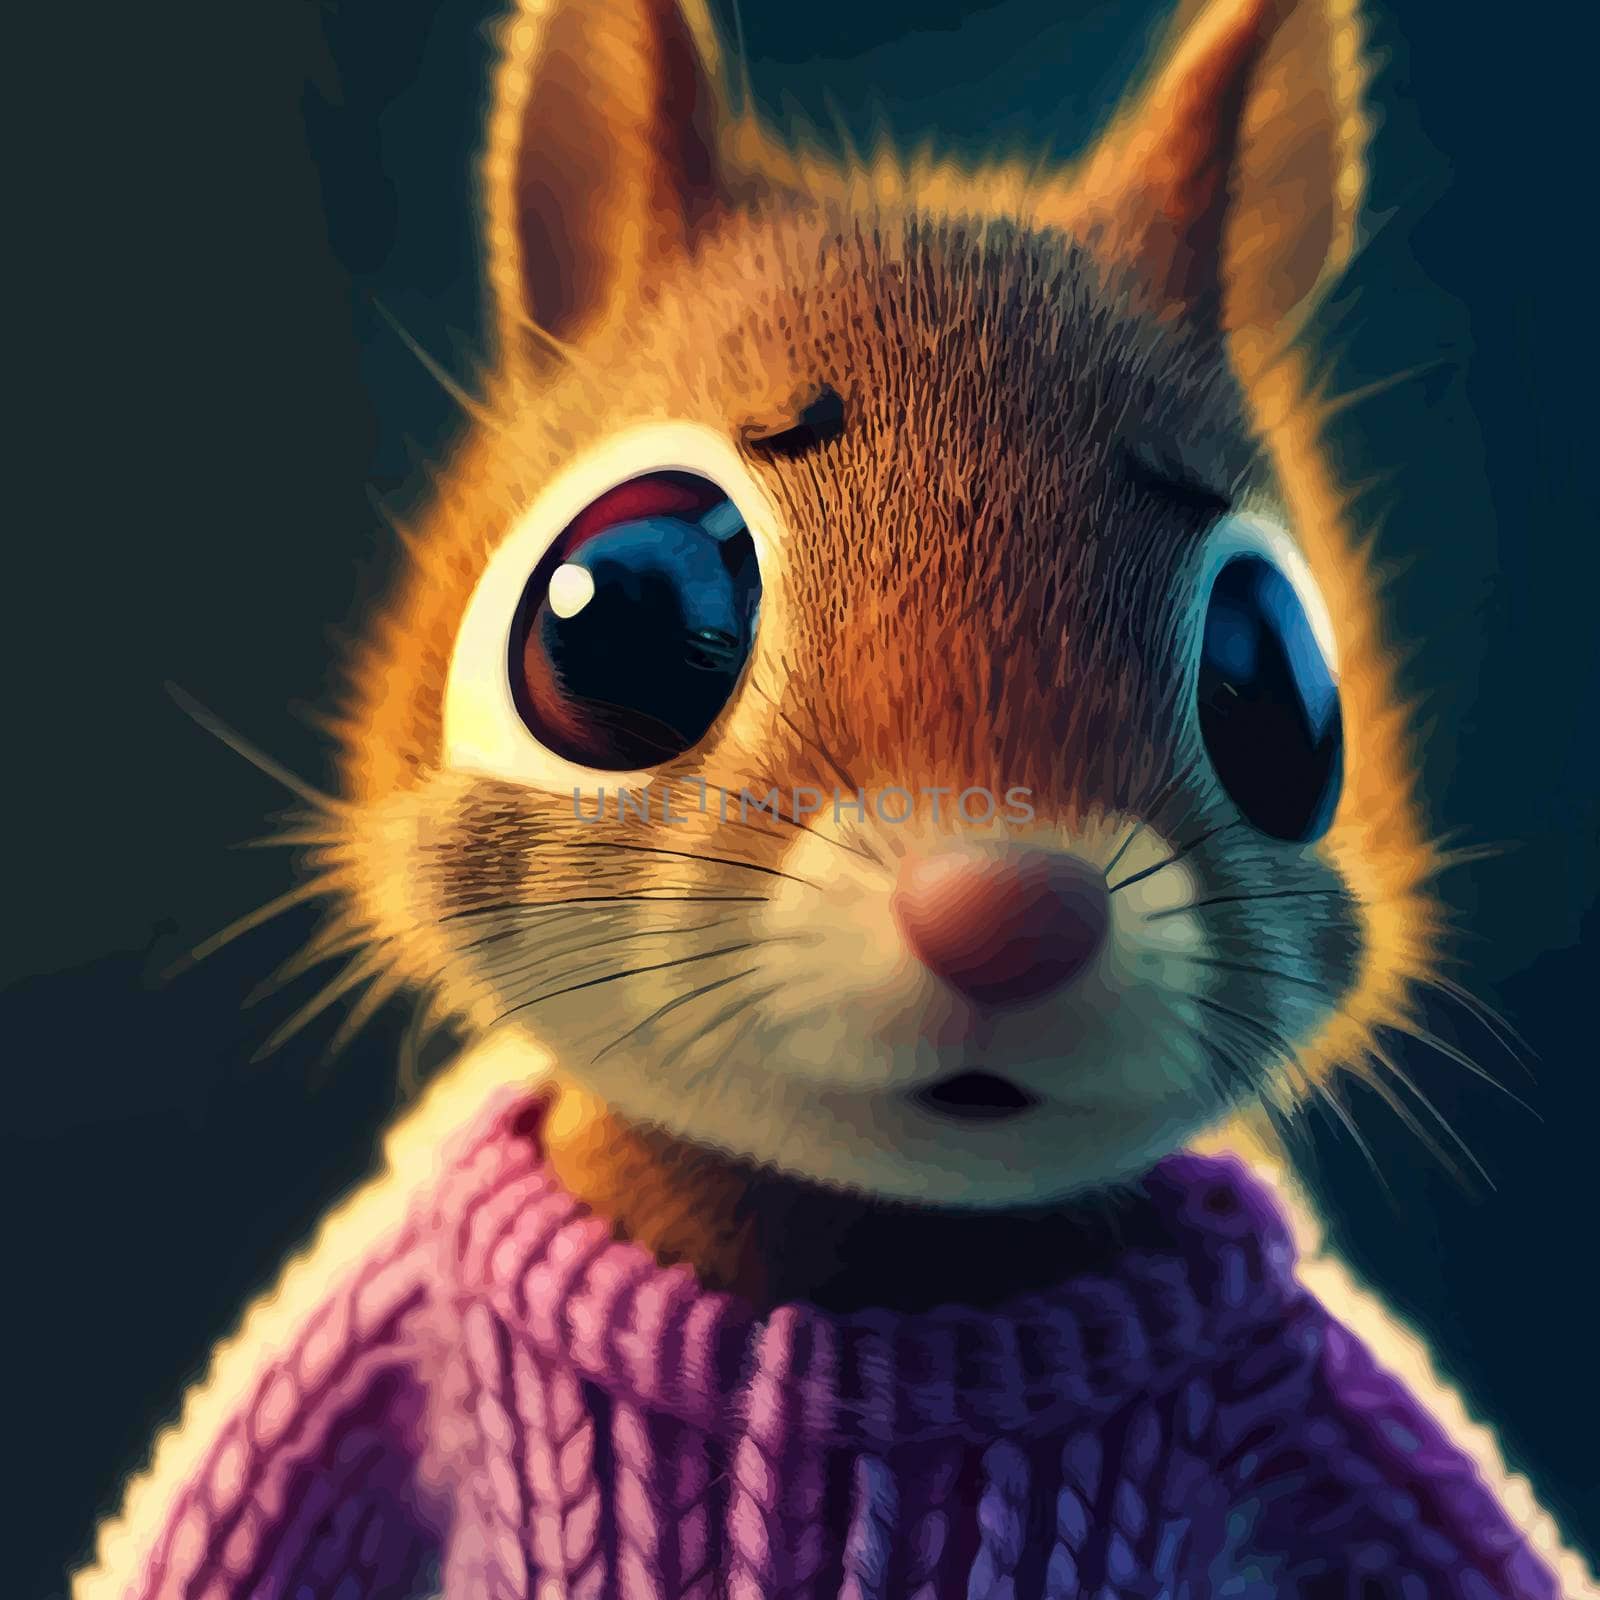 animated illustration of a cute squirrel, animated squirrel portrait.